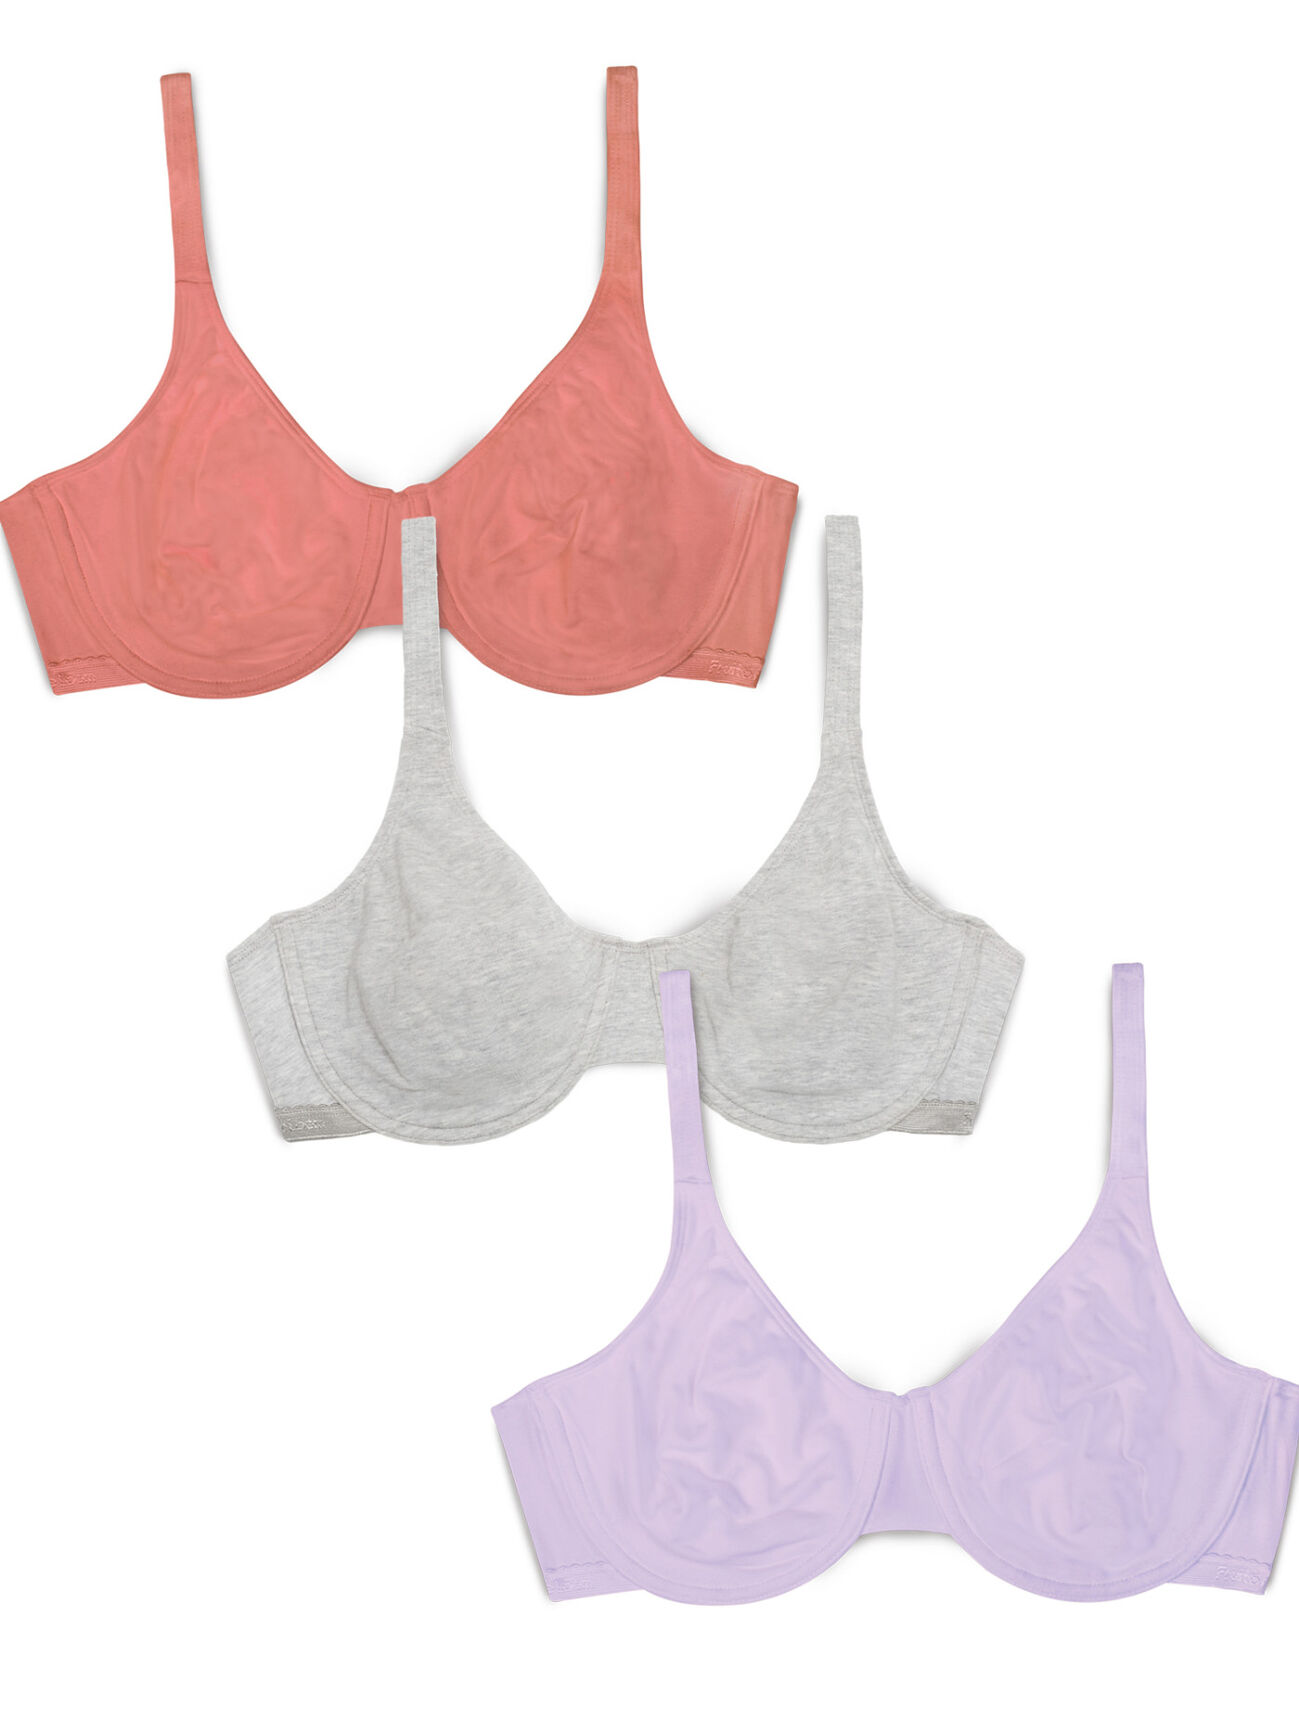 Fruit of the Loom, Intimates & Sleepwear, Pink Fruit Of The Loom Cotton  Underwire Bra 38d